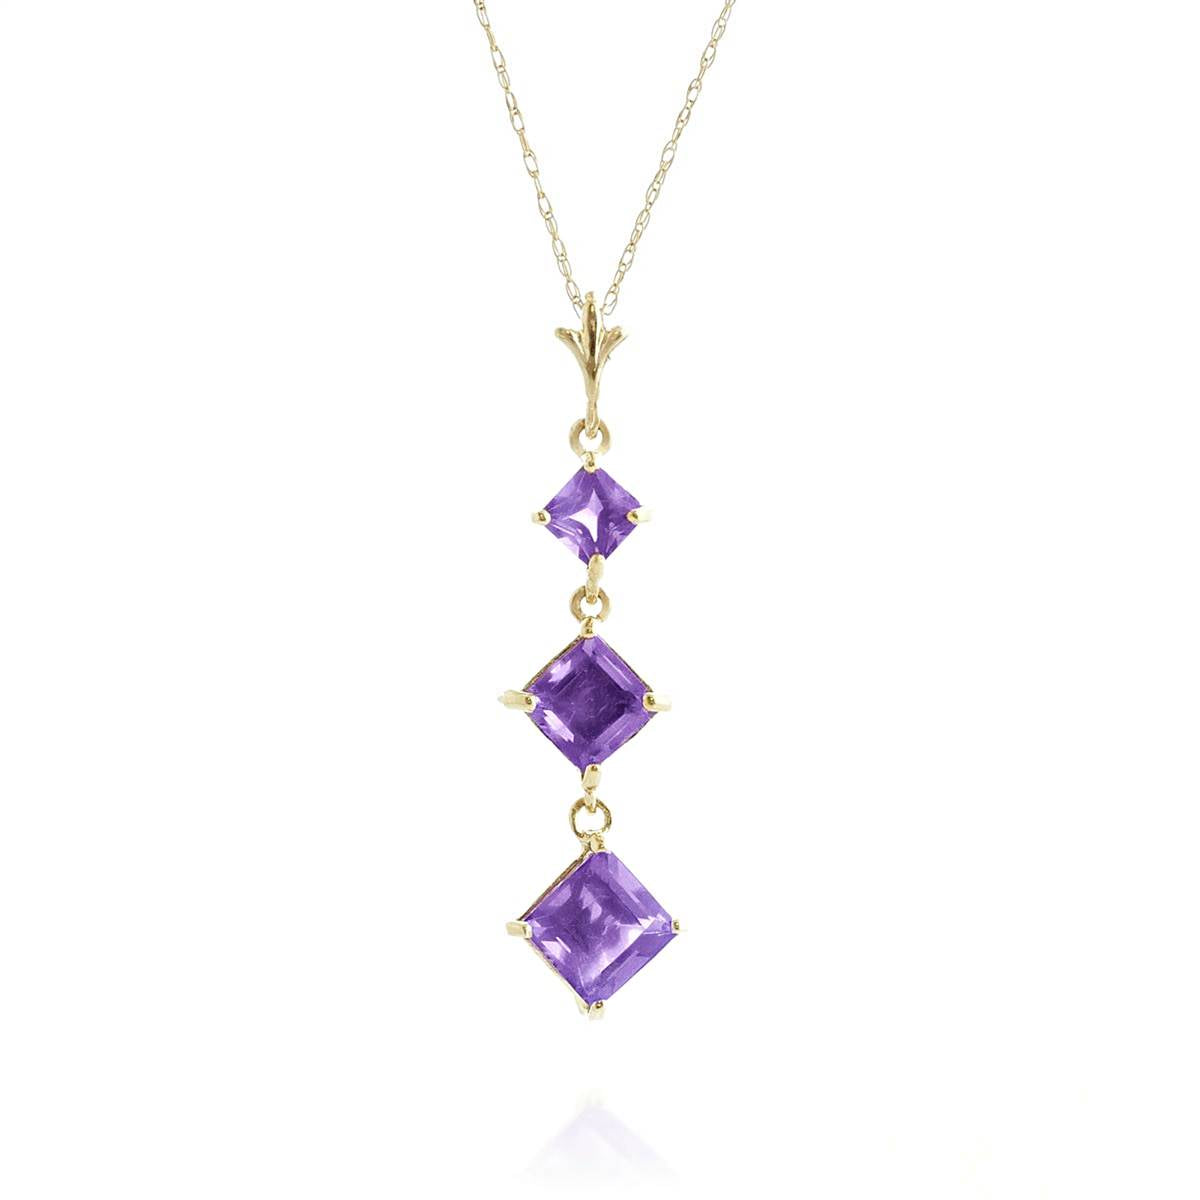 2.4 Carat 14K Solid Yellow Gold Sentimento Amethyst Necklace